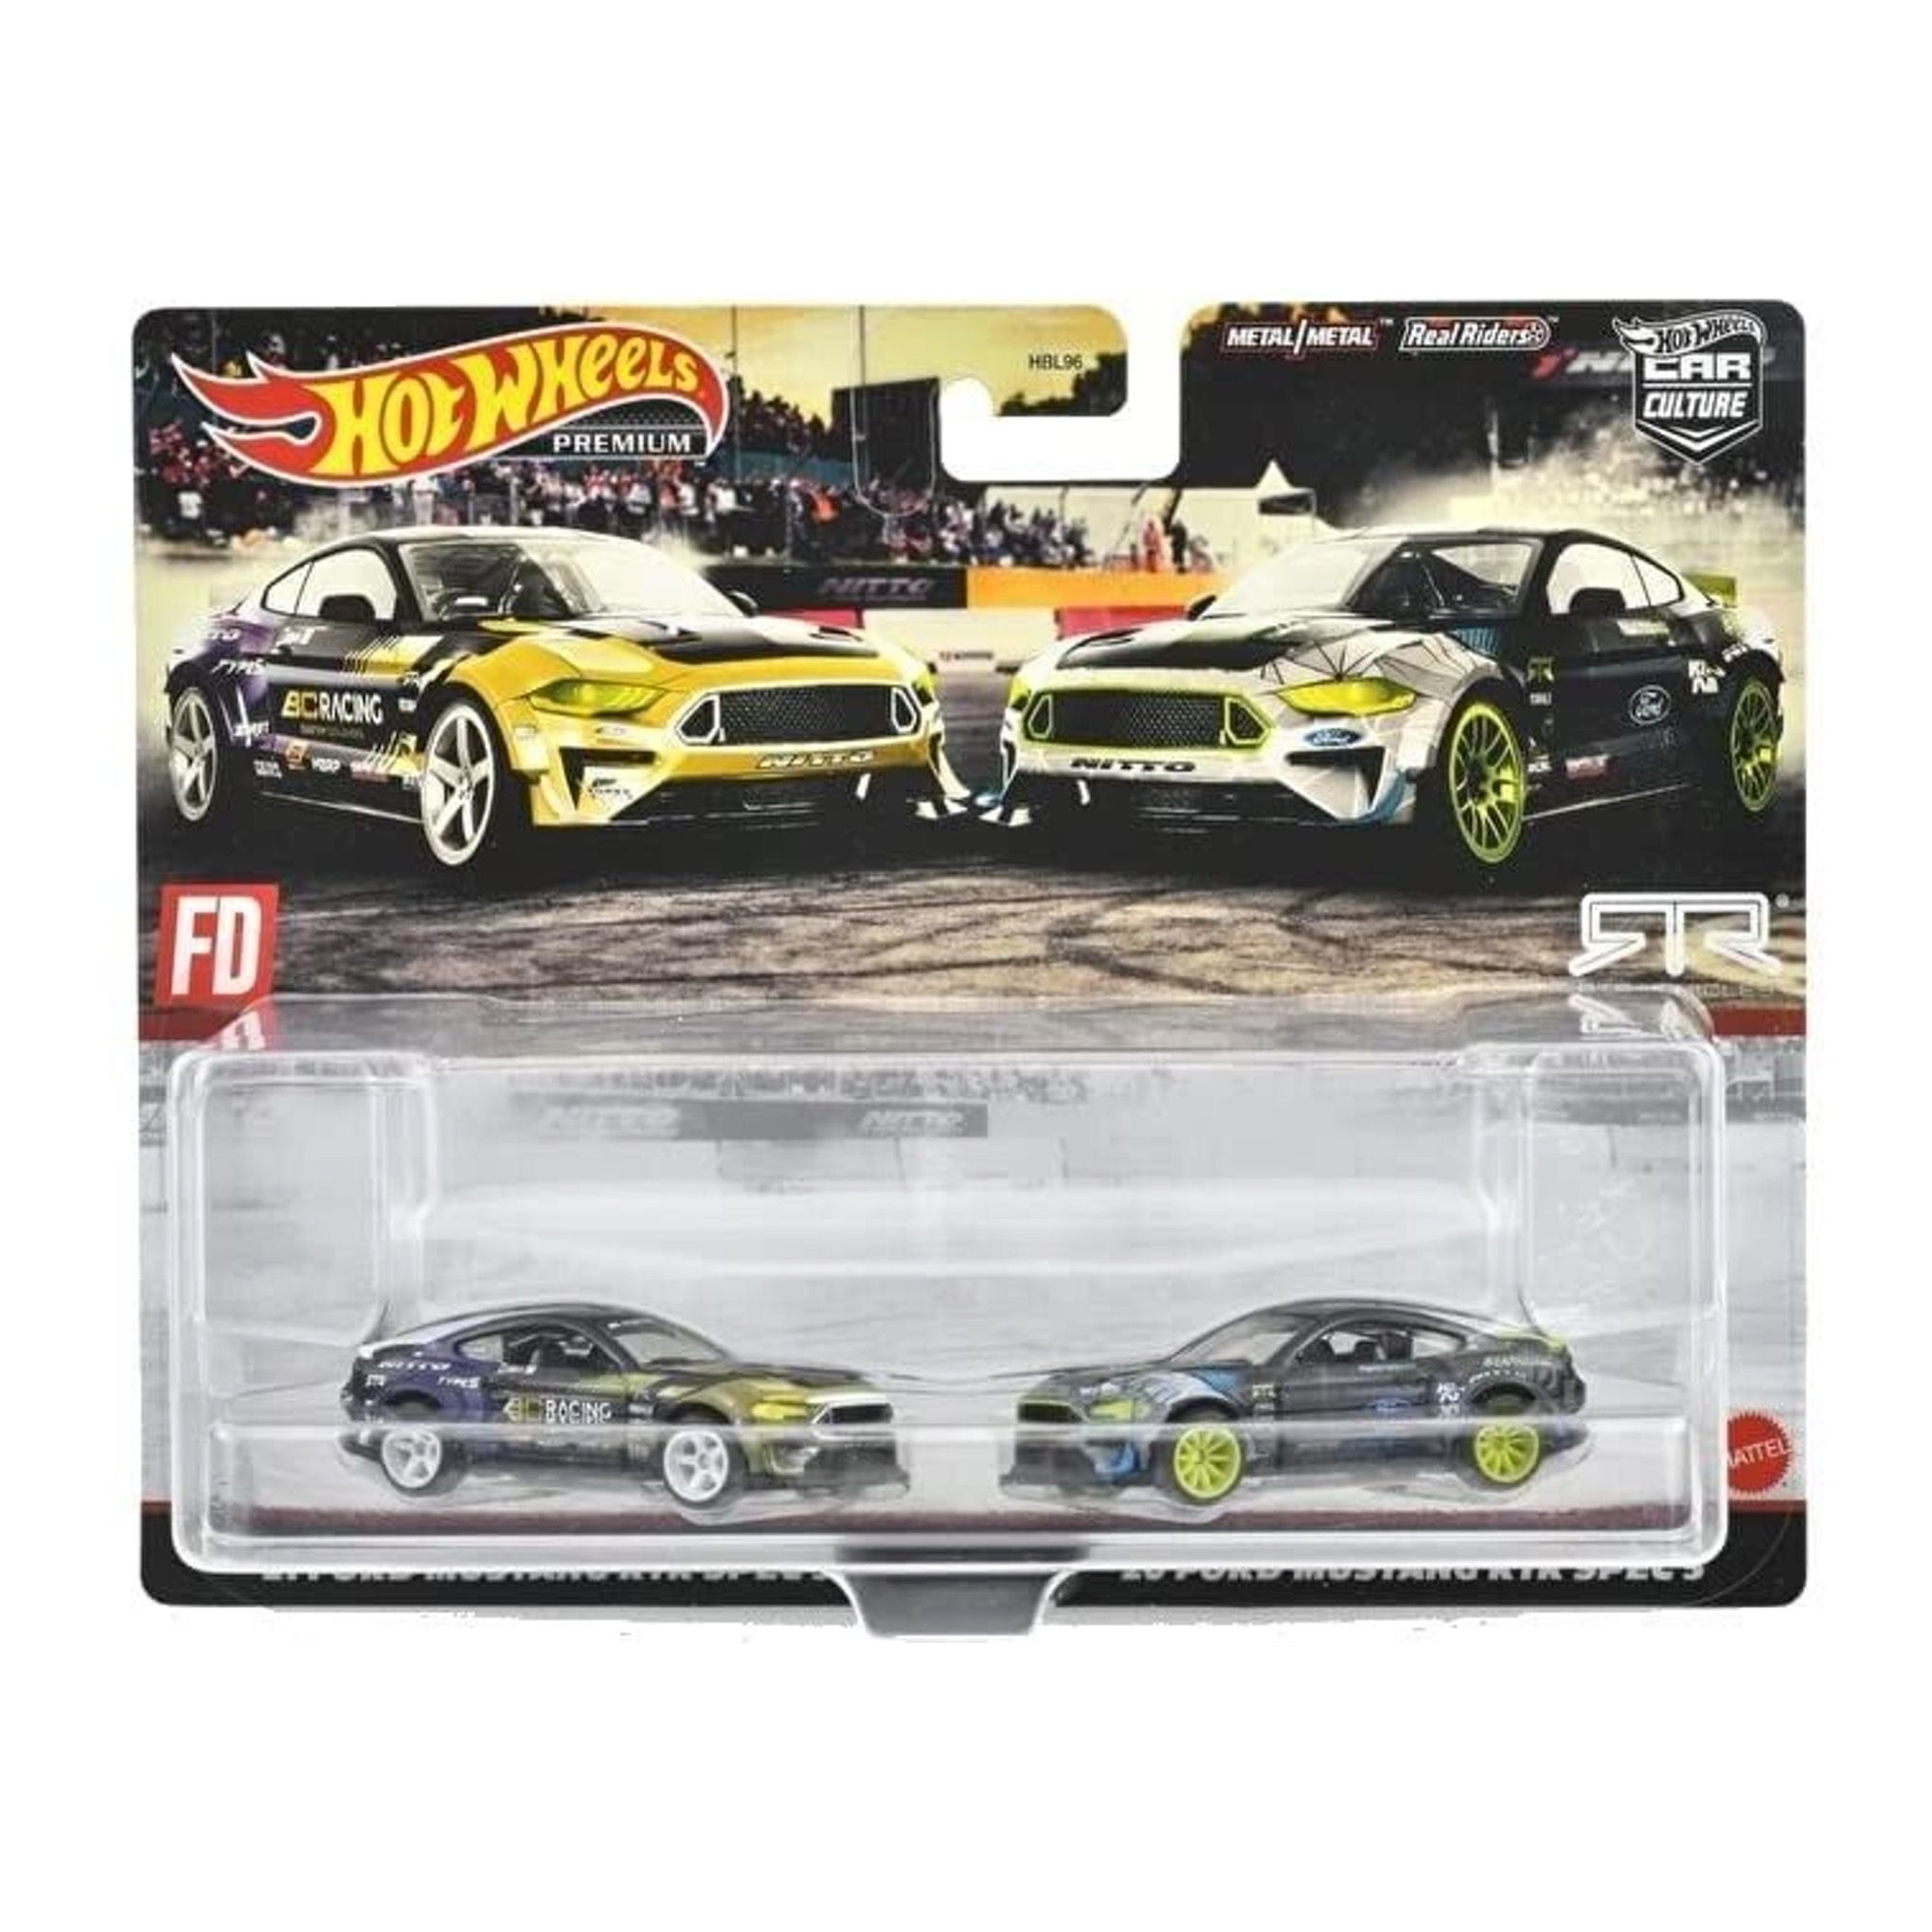 Машинка Hot Wheels HBL96-HCY71 металлическая 21 Ford Mustang & 20 Ford Mustang игрушечная металлическая машинка shelby ford mustang голубая коллекционная crm 486